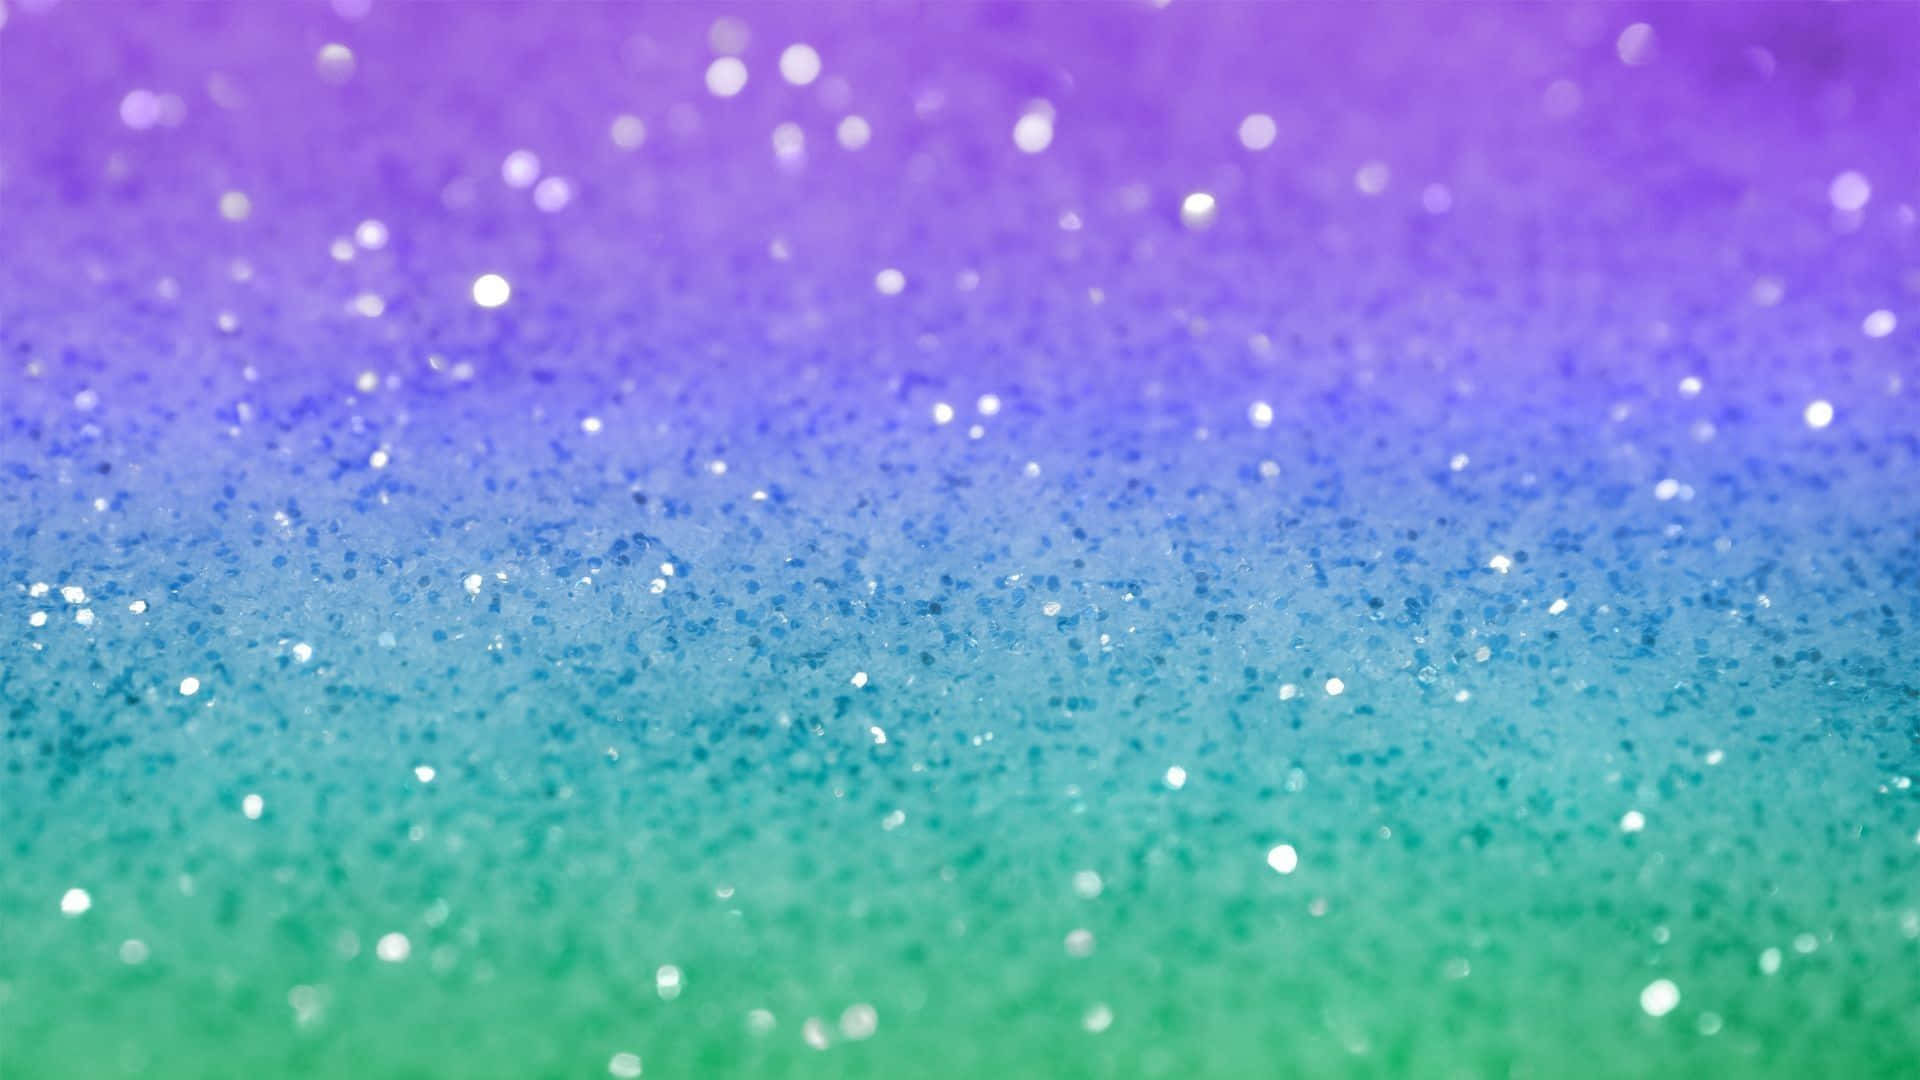 Image  Glittery Sparkles Blur Into a Galaxy of Twinkles